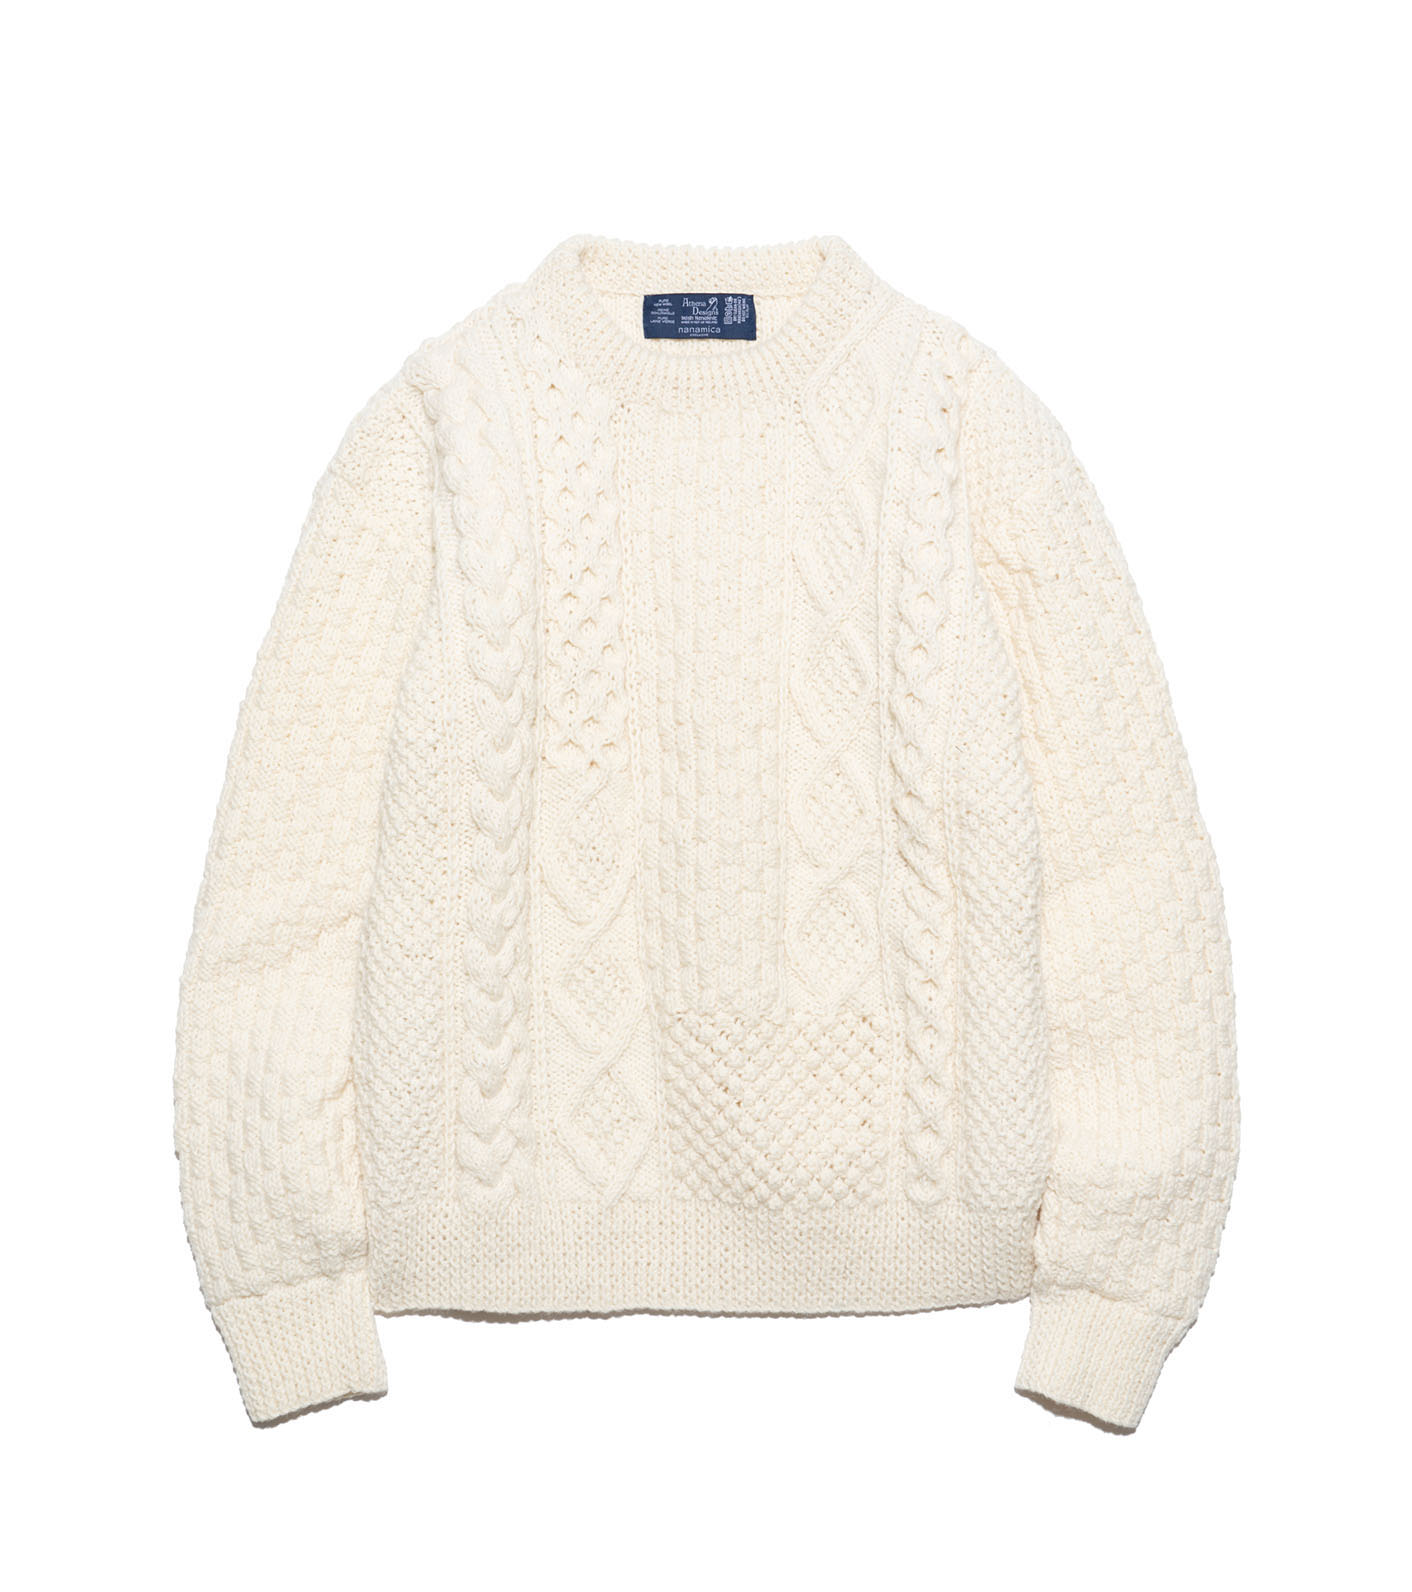 nanamica / Sweater Multi Knitted